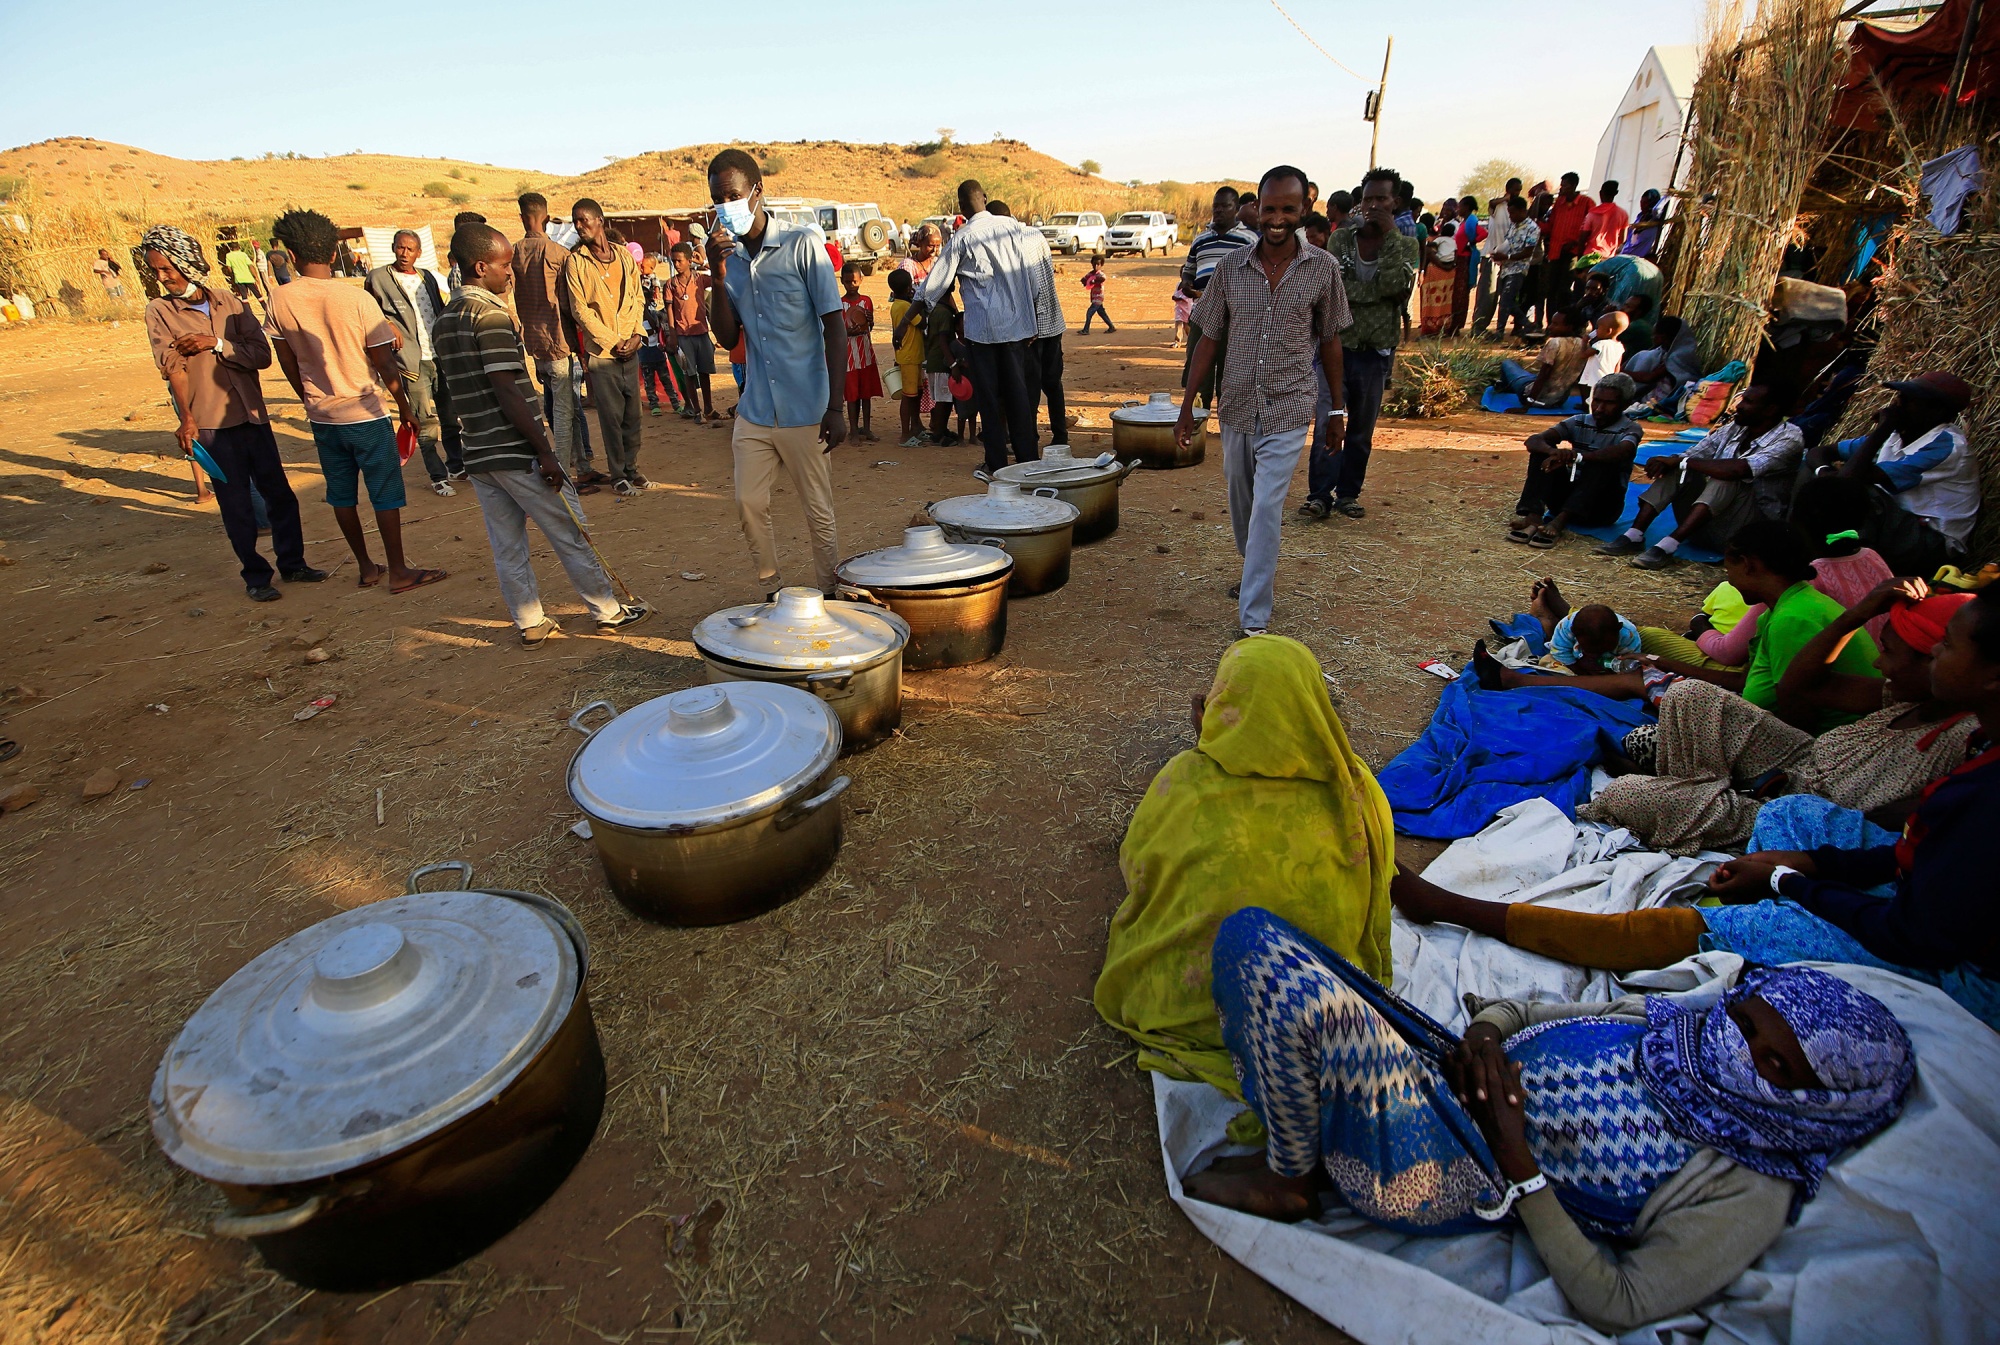 Ethiopian refugees from Tigray province wait for food at a camp in Sudan's Gedaref province on Nov. 21.